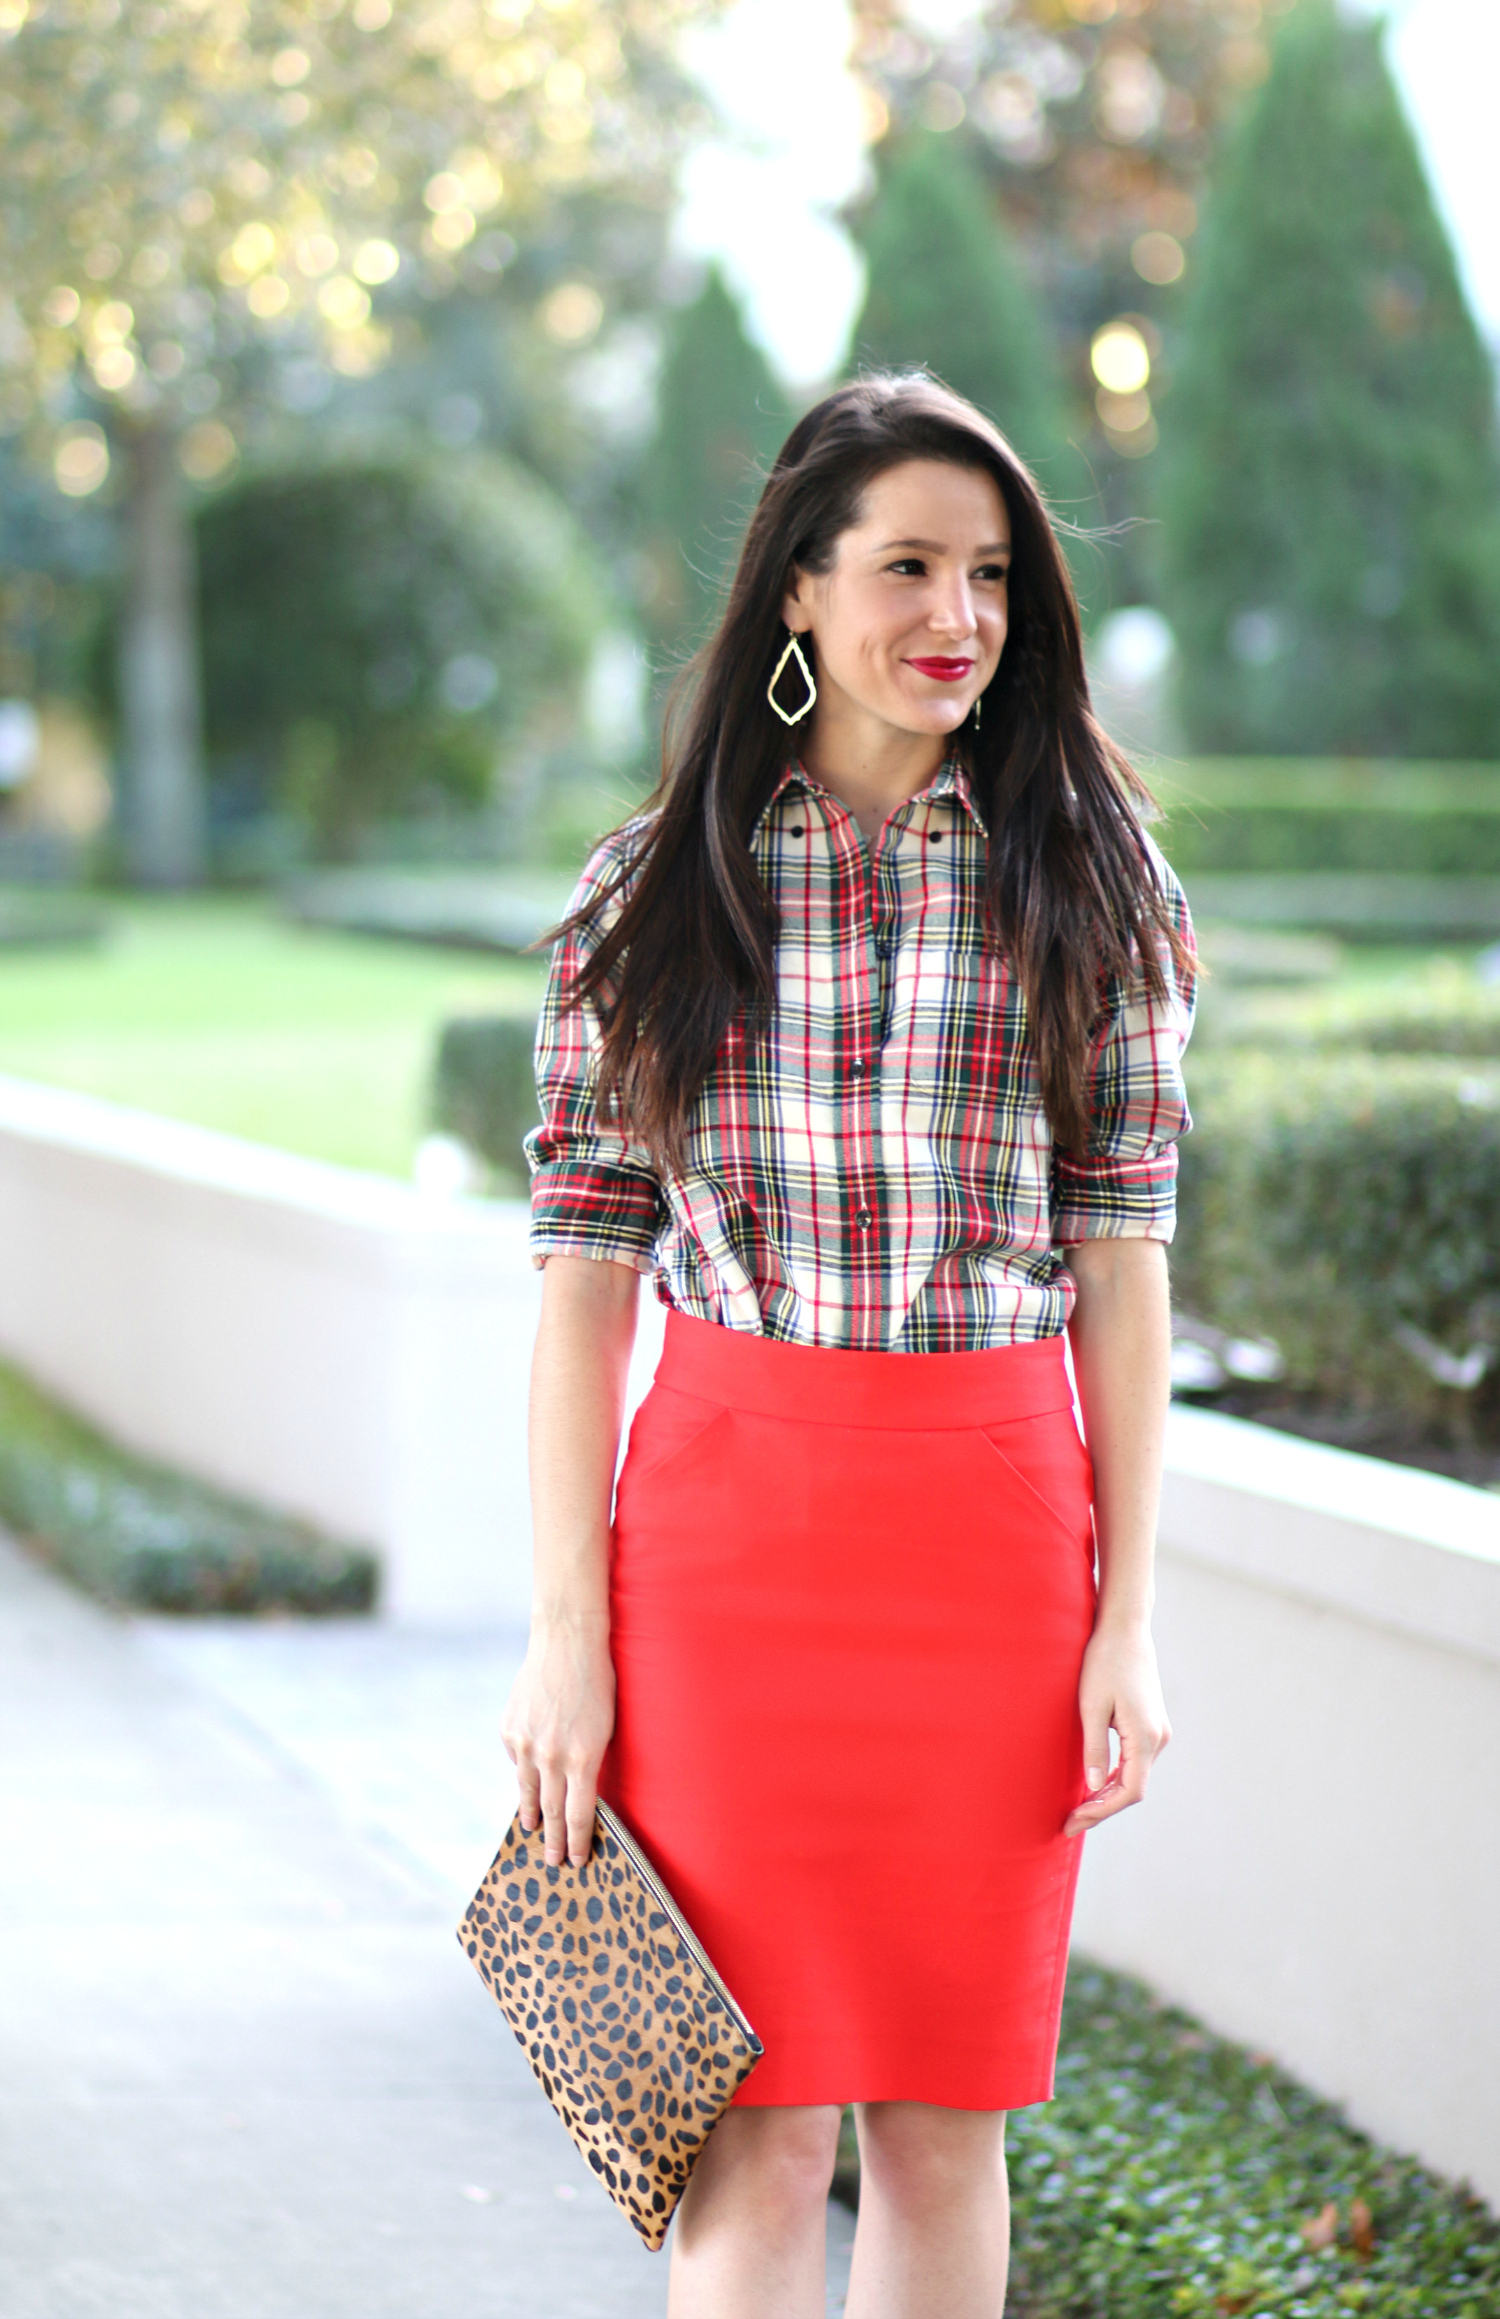 How to wear a red pencil skirt to work during the holidays